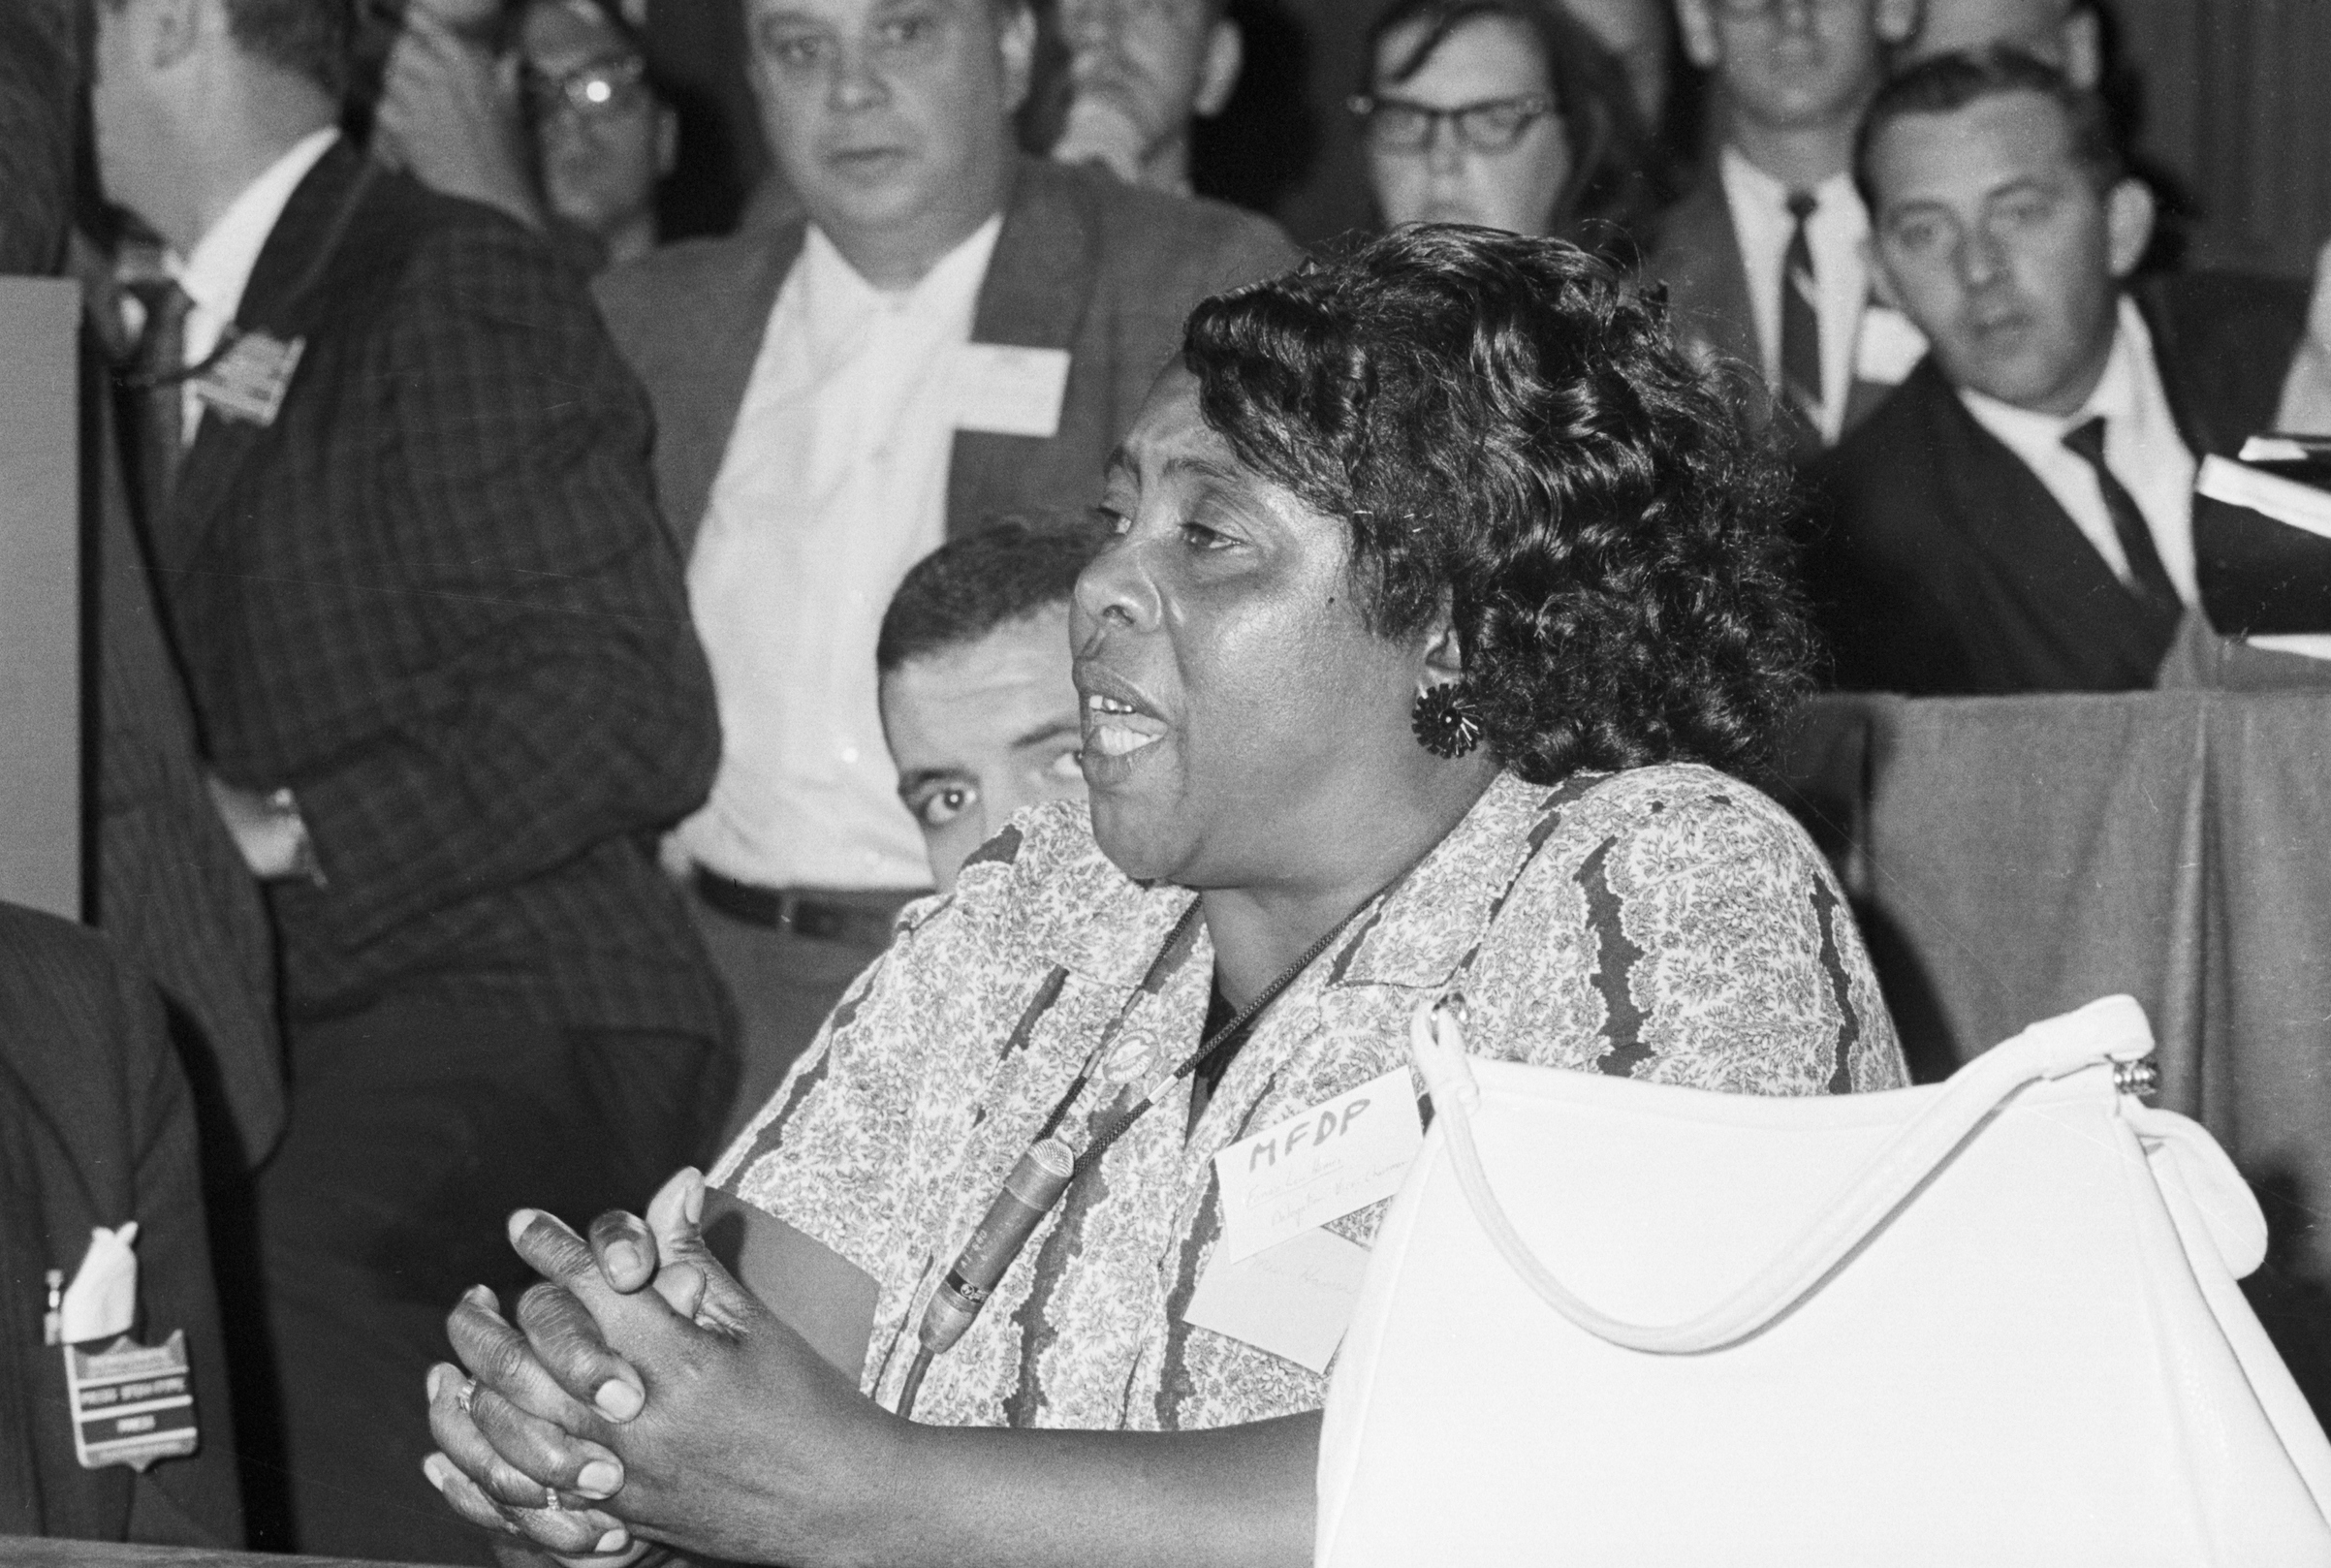 Mississippi Freedom Democratic Party delegate Fannie Lou Hamer speaks out for the meeting of her delegates at a credential meeting prior to the formal meeting of the Democratic National Convention. (Bettmann/Getty Images)